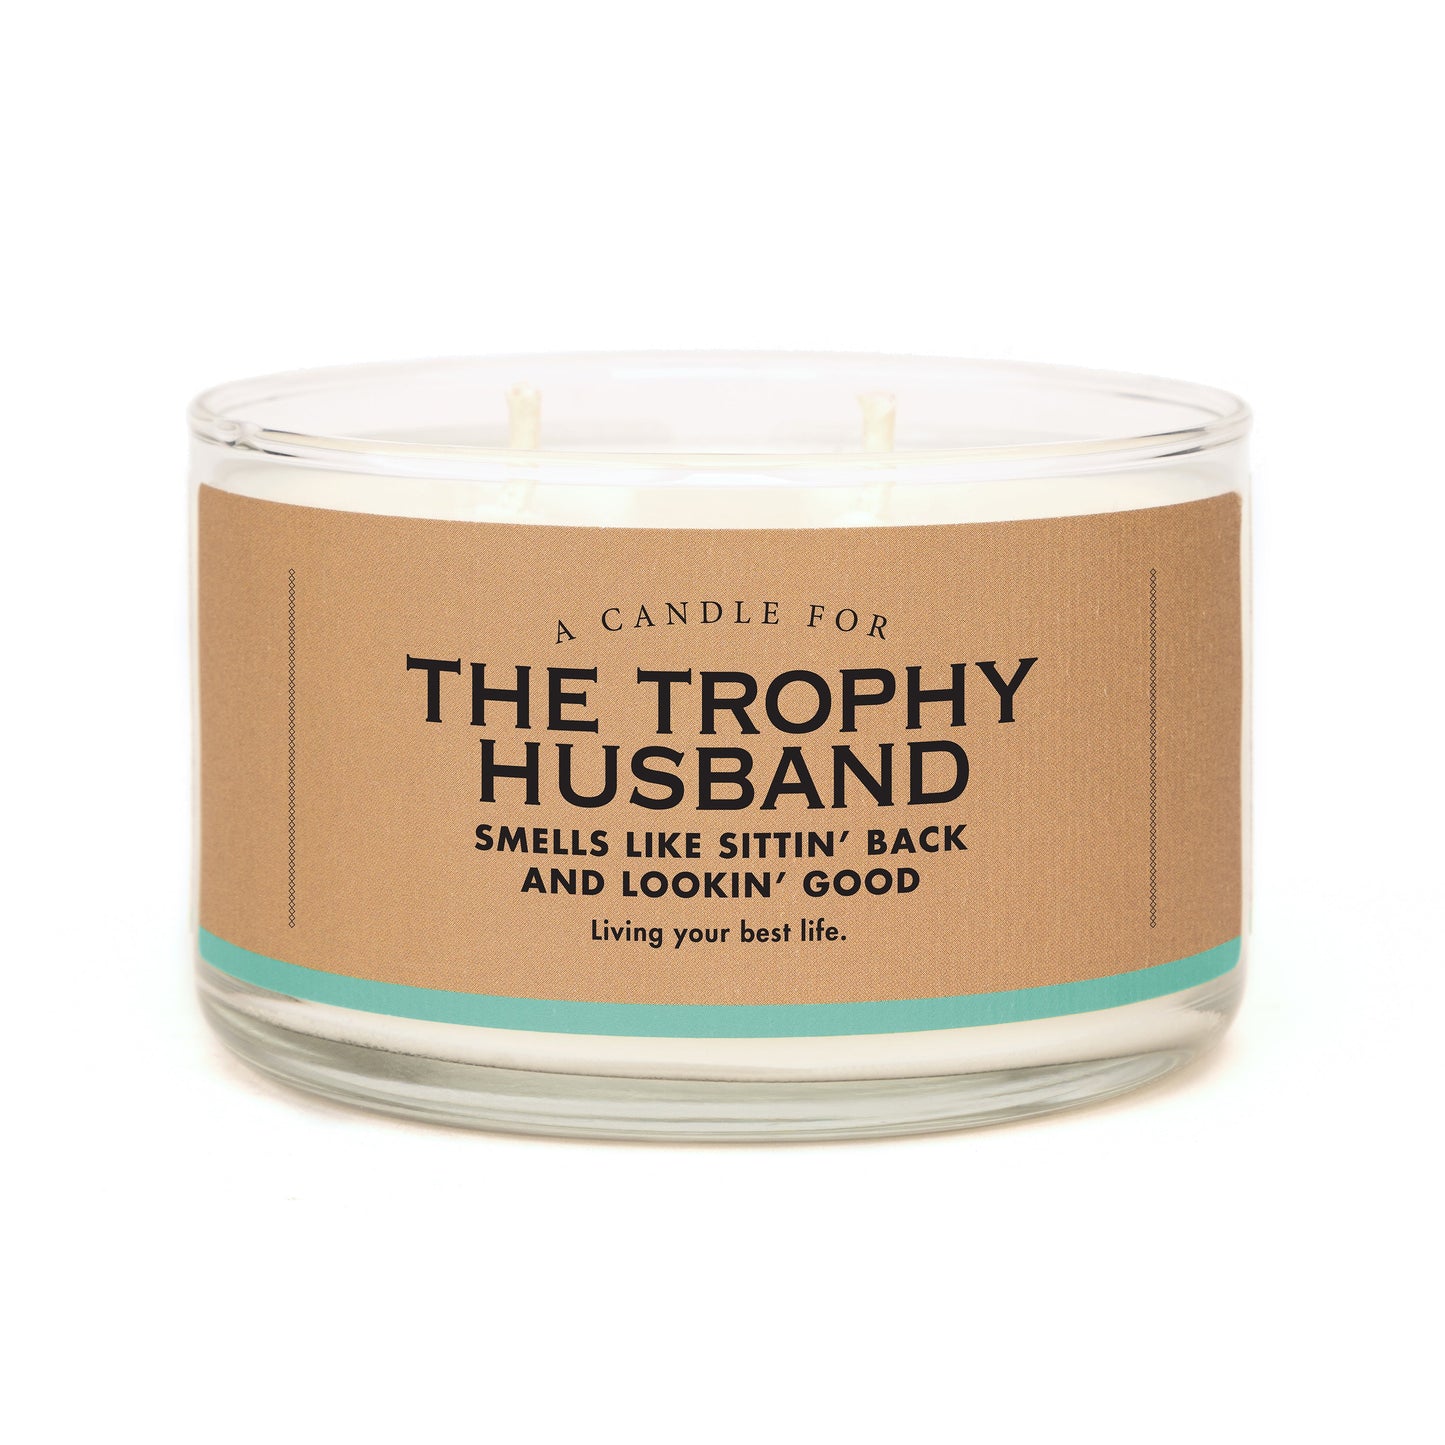 The Trophy Husband Candle